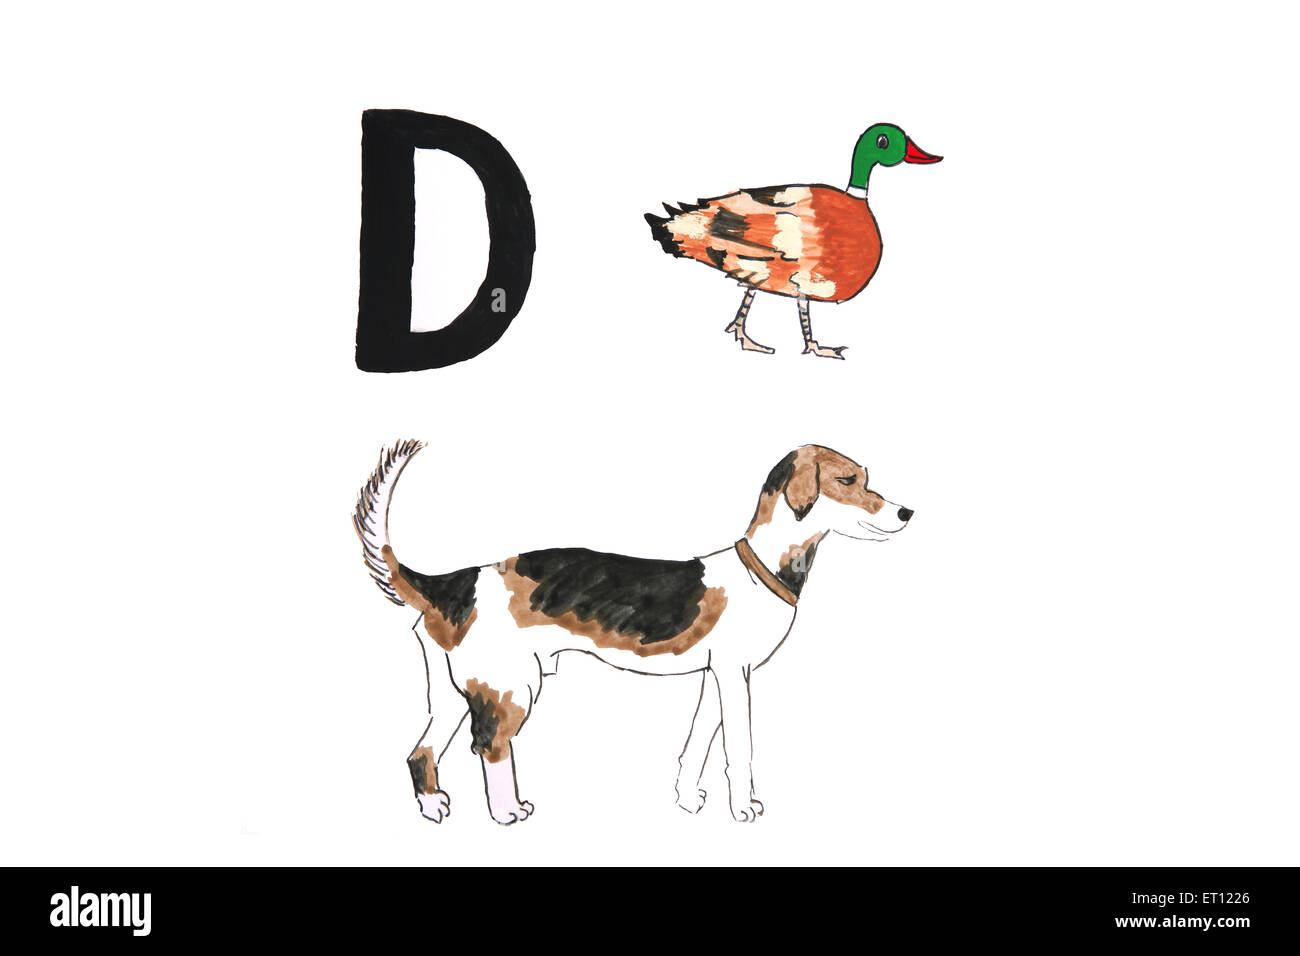 d for duck, d for dog Stock Photo